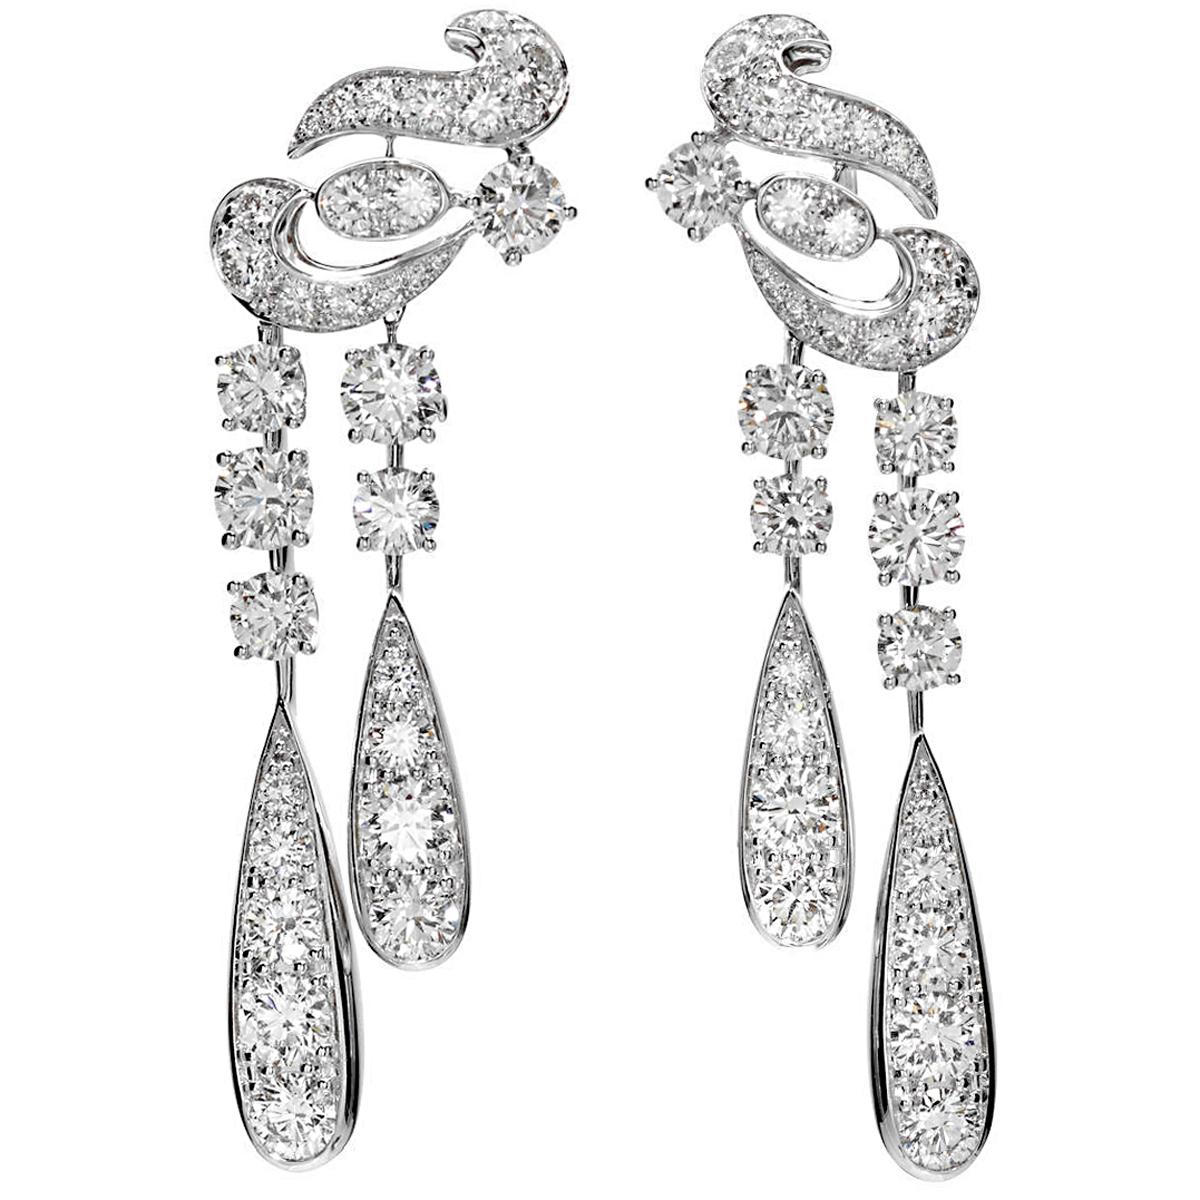 An incredible pair of Graff earrings designed in a swirl motif and suspending diamond drops with the finest Graff round diamonds weighing appx 10.65cts. The earrings are mounting in shimmering 18k white gold and measure 2.37